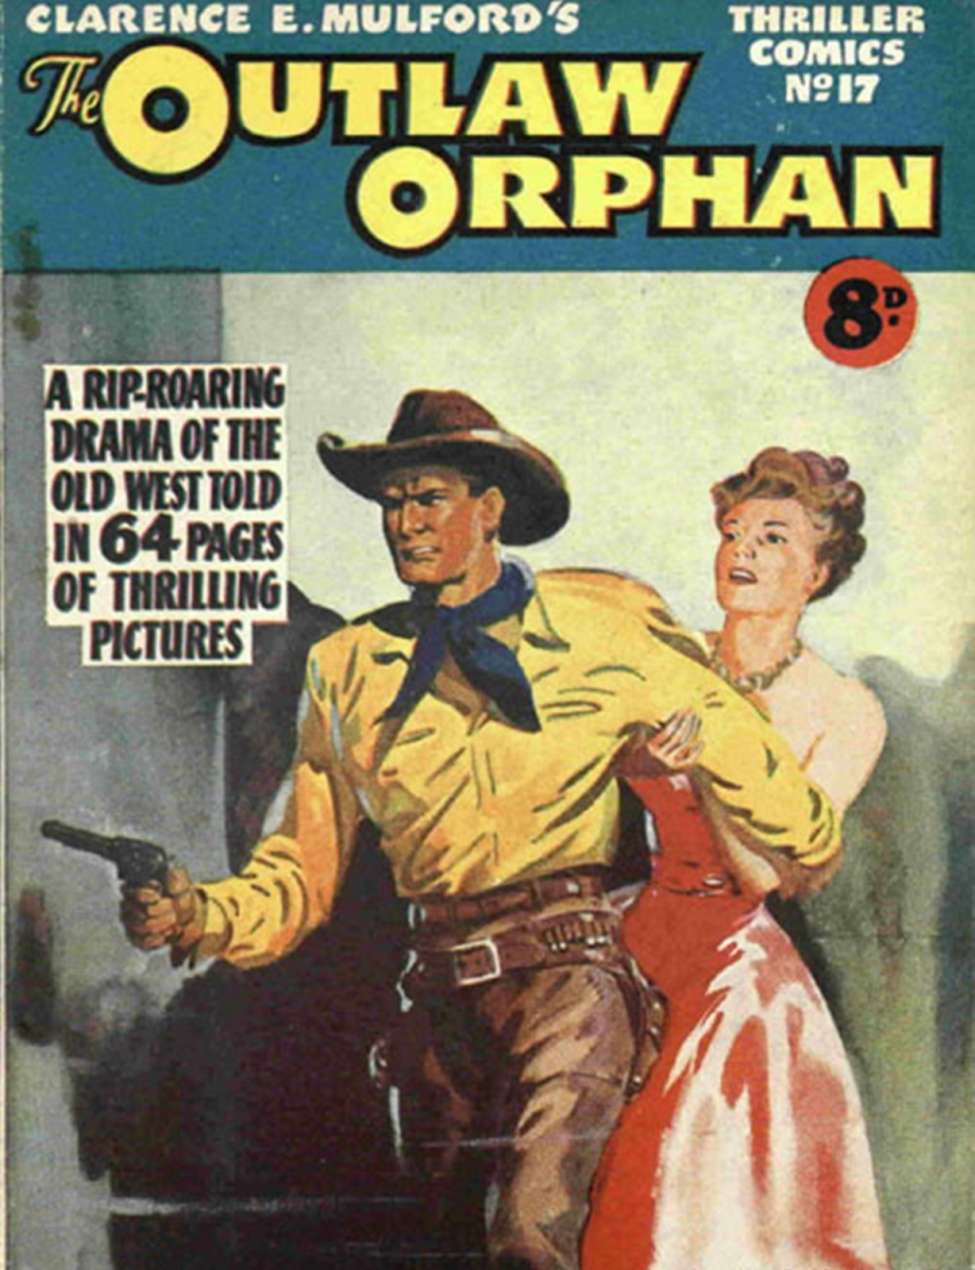 Book Cover For Thriller Comics 17 - The Outlaw Orphan